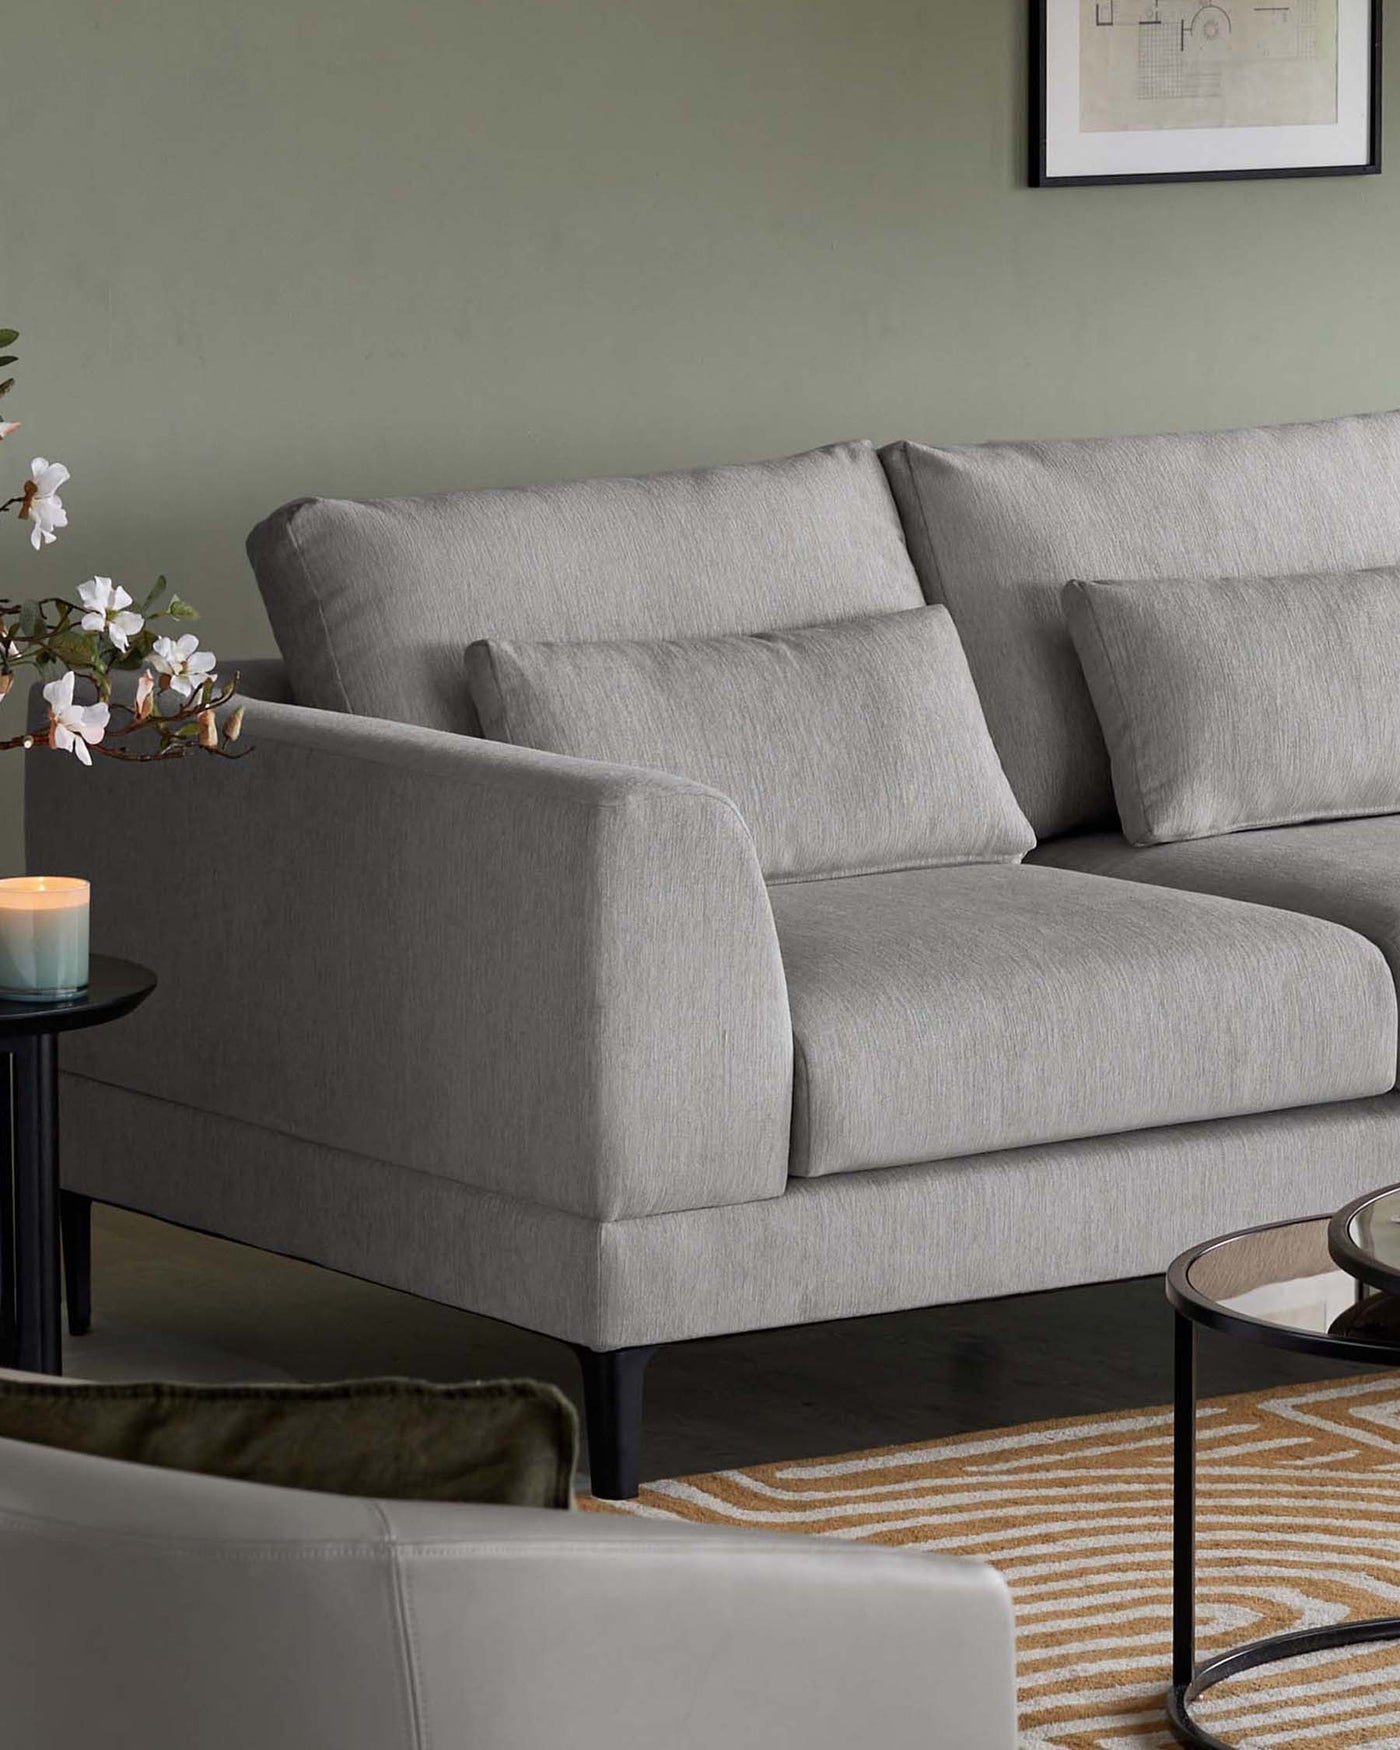 Elegant contemporary three-seater sofa in a light grey fabric upholstery with clean lines, featuring plush back cushions and a simplistic armrest design. Paired with a small round side table with a black finish and a glass top which sits on a patterned beige and yellow rug. There's also a subtle glimpse of a velvet green cushion, suggesting an additional piece of furniture in the foreground.